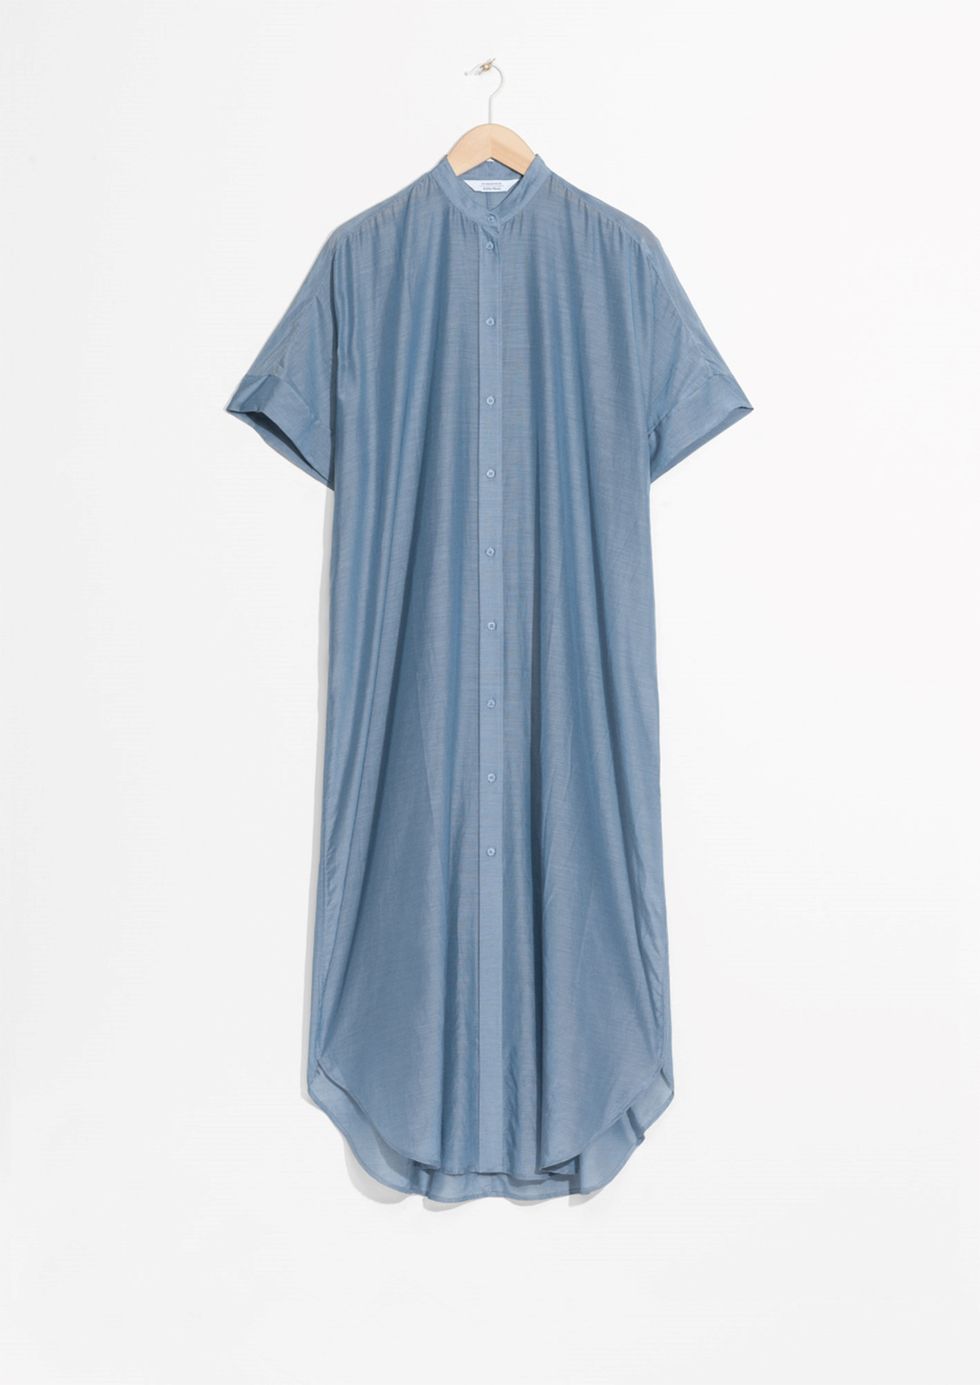 Clothing, Product, Sleeve, Azure, Aqua, Electric blue, Jersey, Grey, Lavender, Teal, 